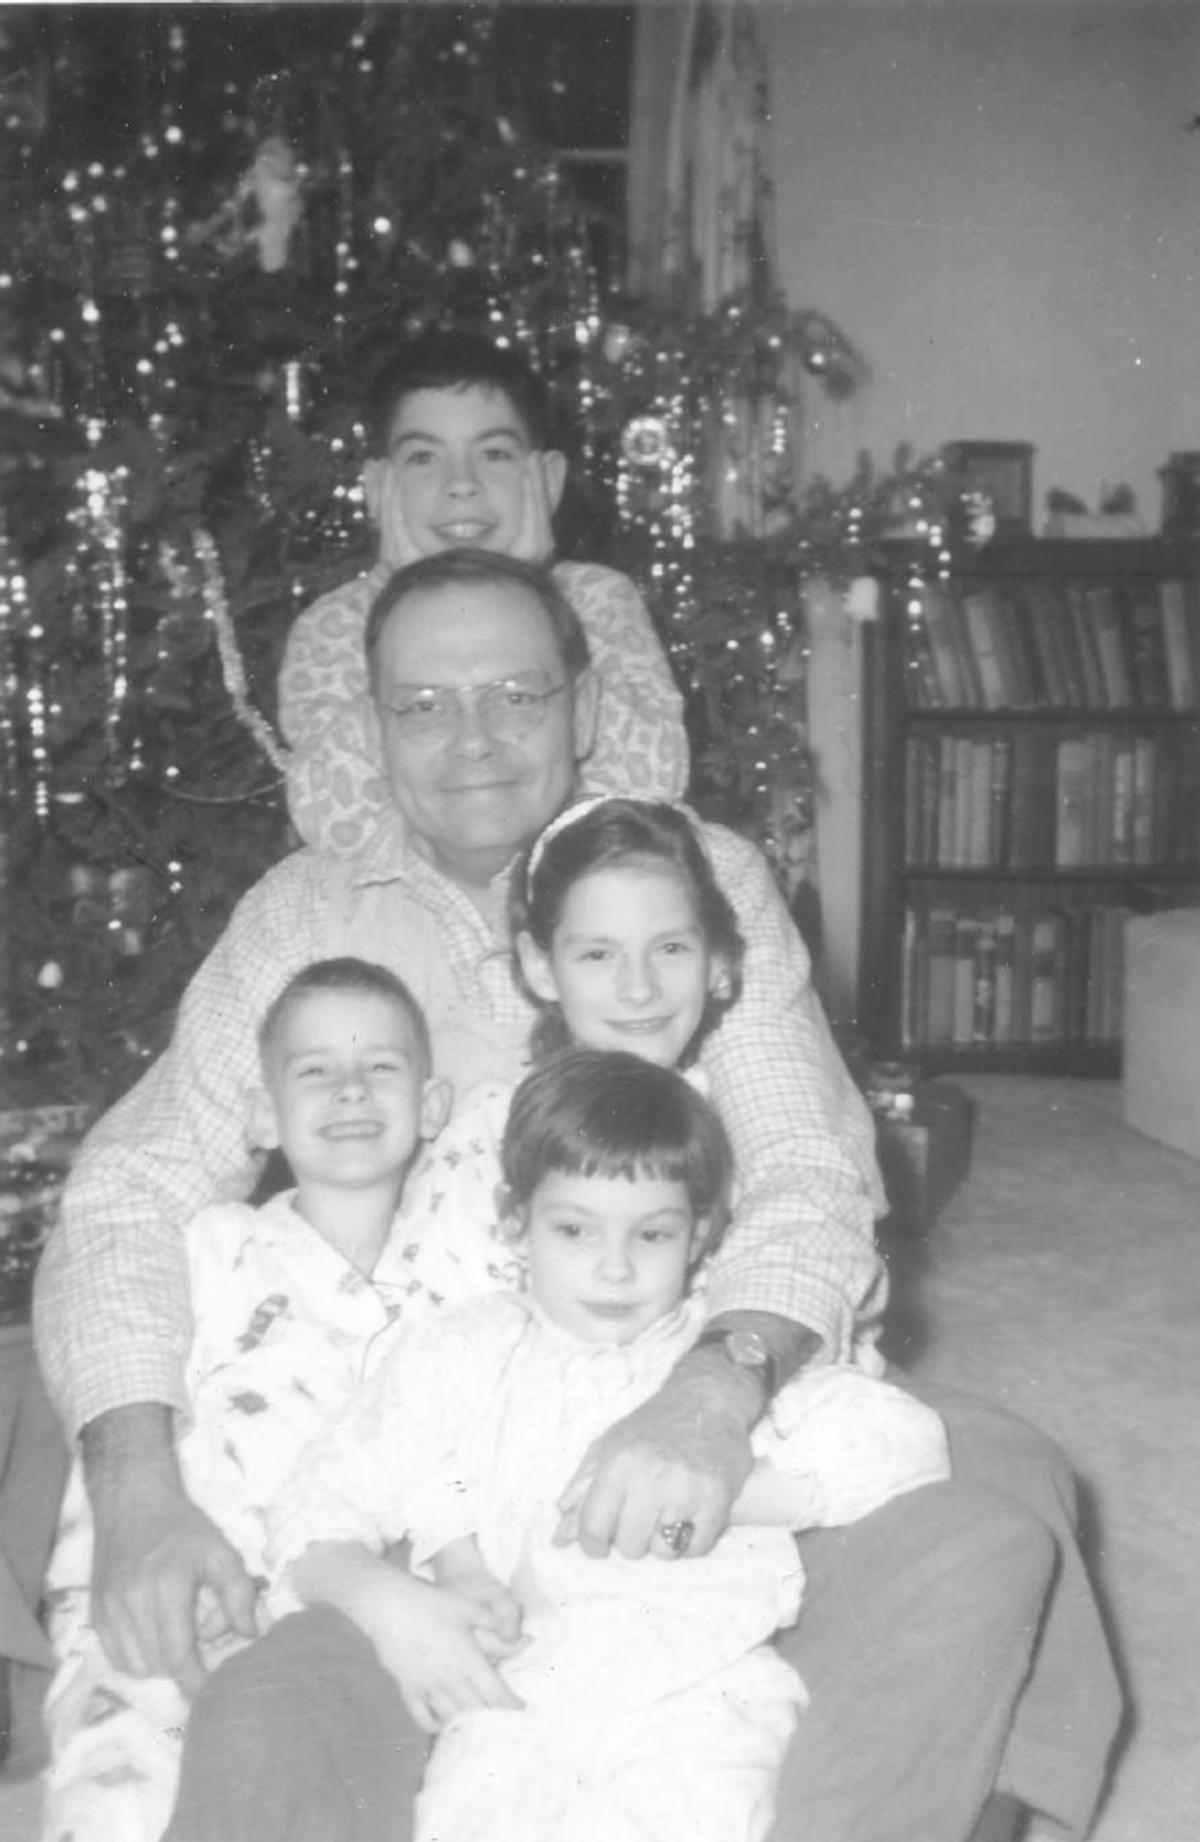 Me (on top), my dad and my three siblings, 1961